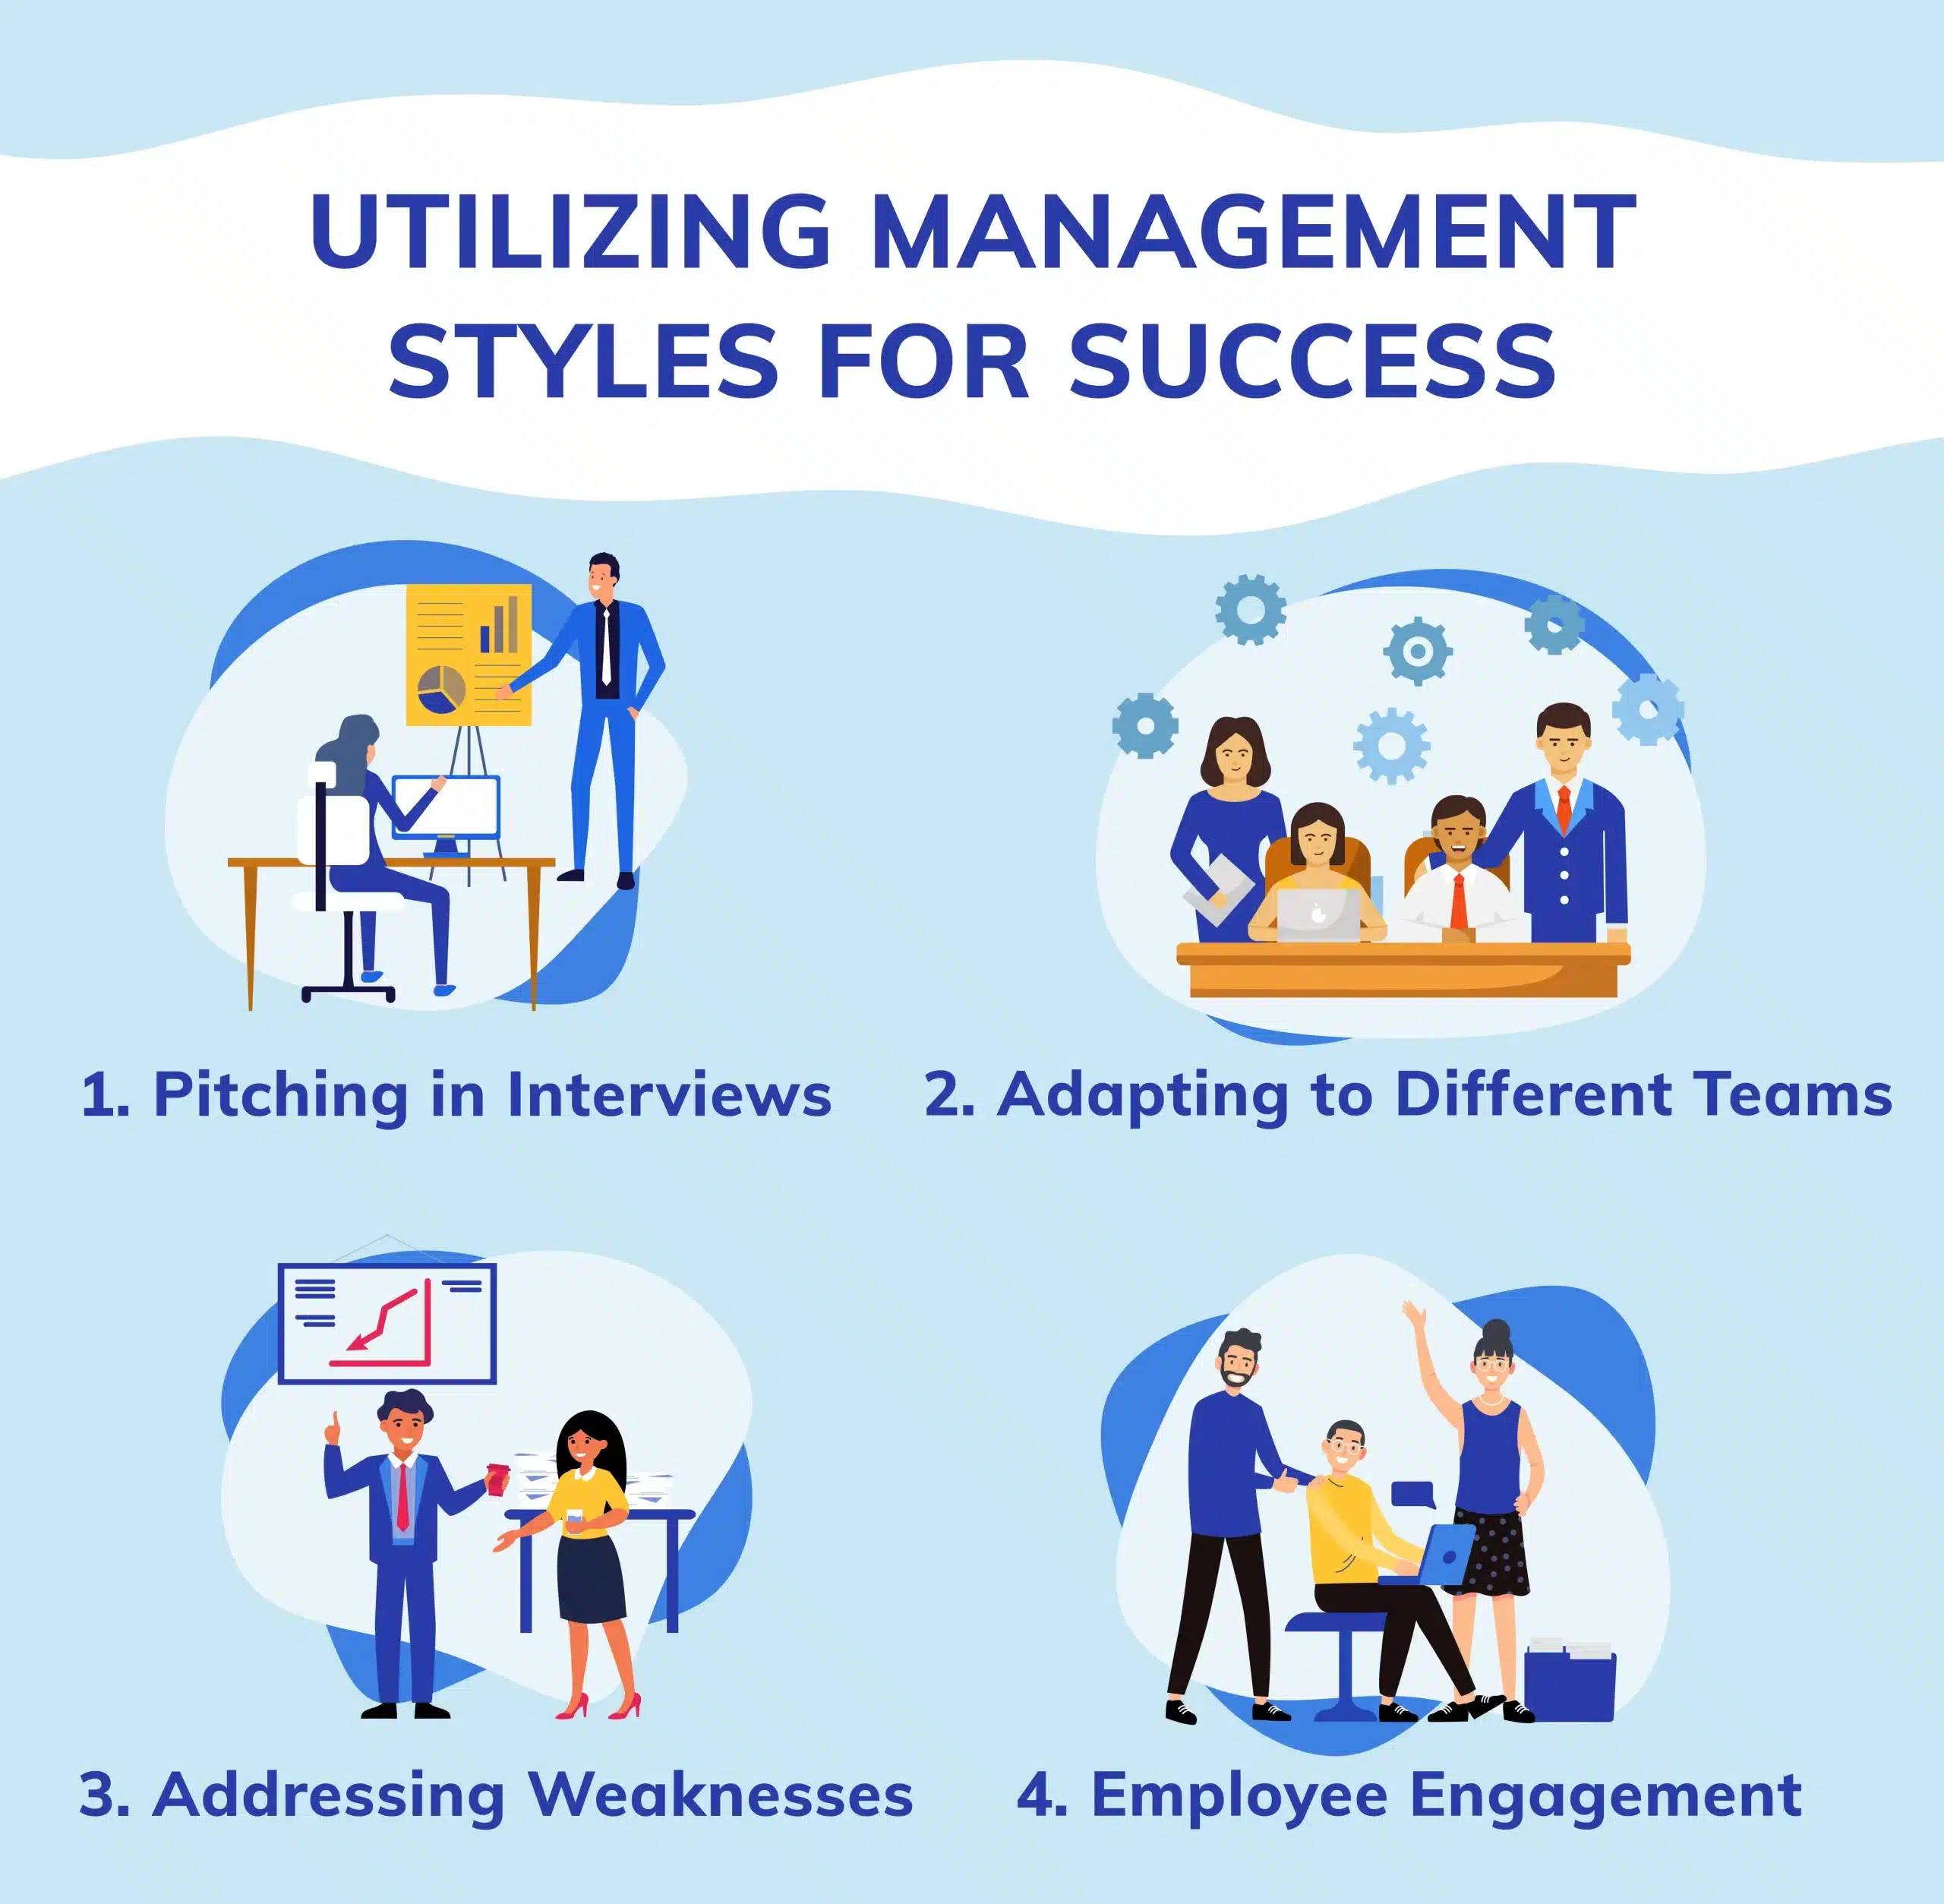 Management styles for success